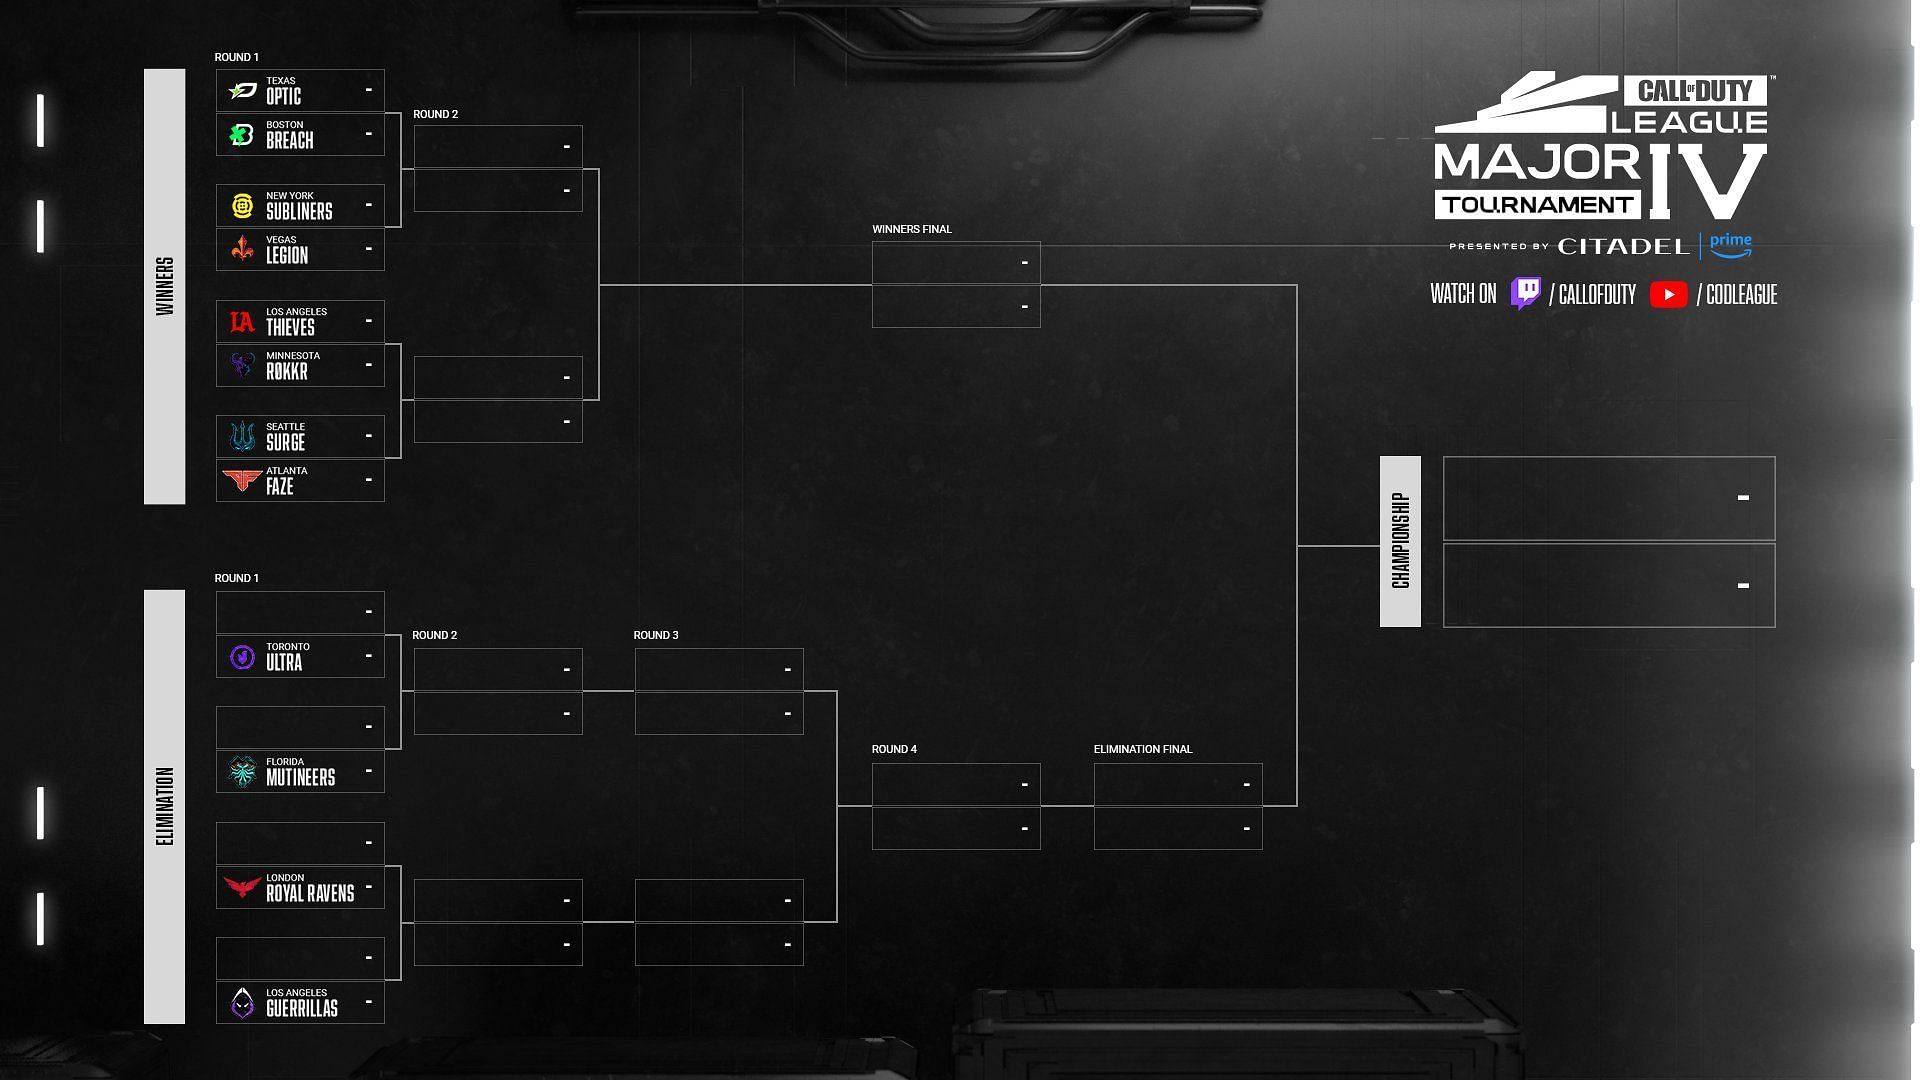 Call of Duty League Major IV Tournament Weekend Match Roster (Image via Twitter/Call of Duty League)